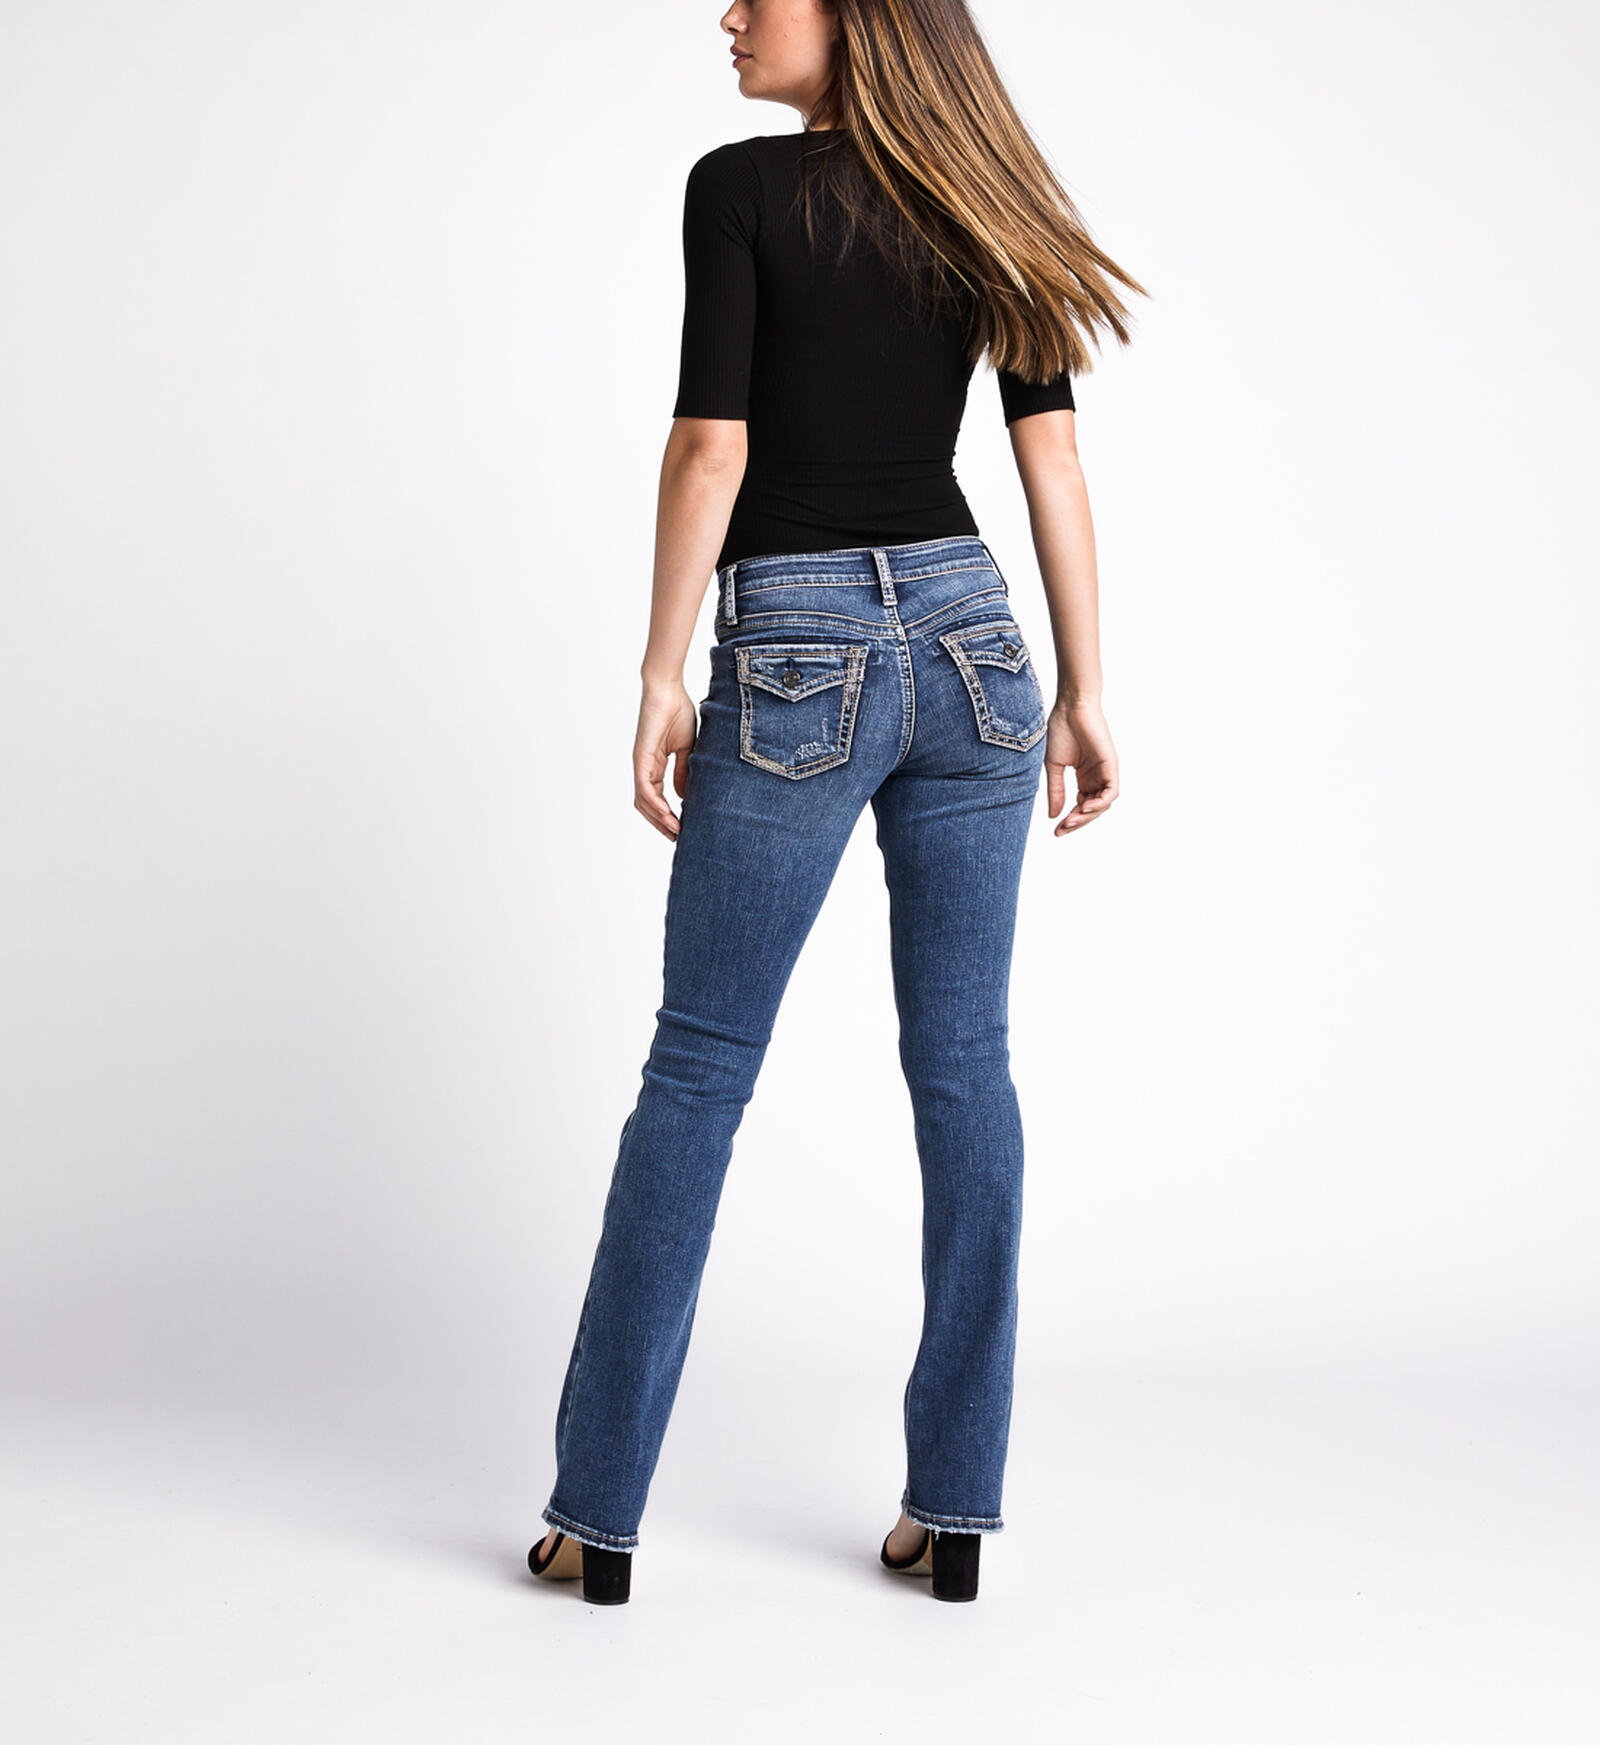 Buy Suki Mid Rise Slim Bootcut Jeans for USD 89.00